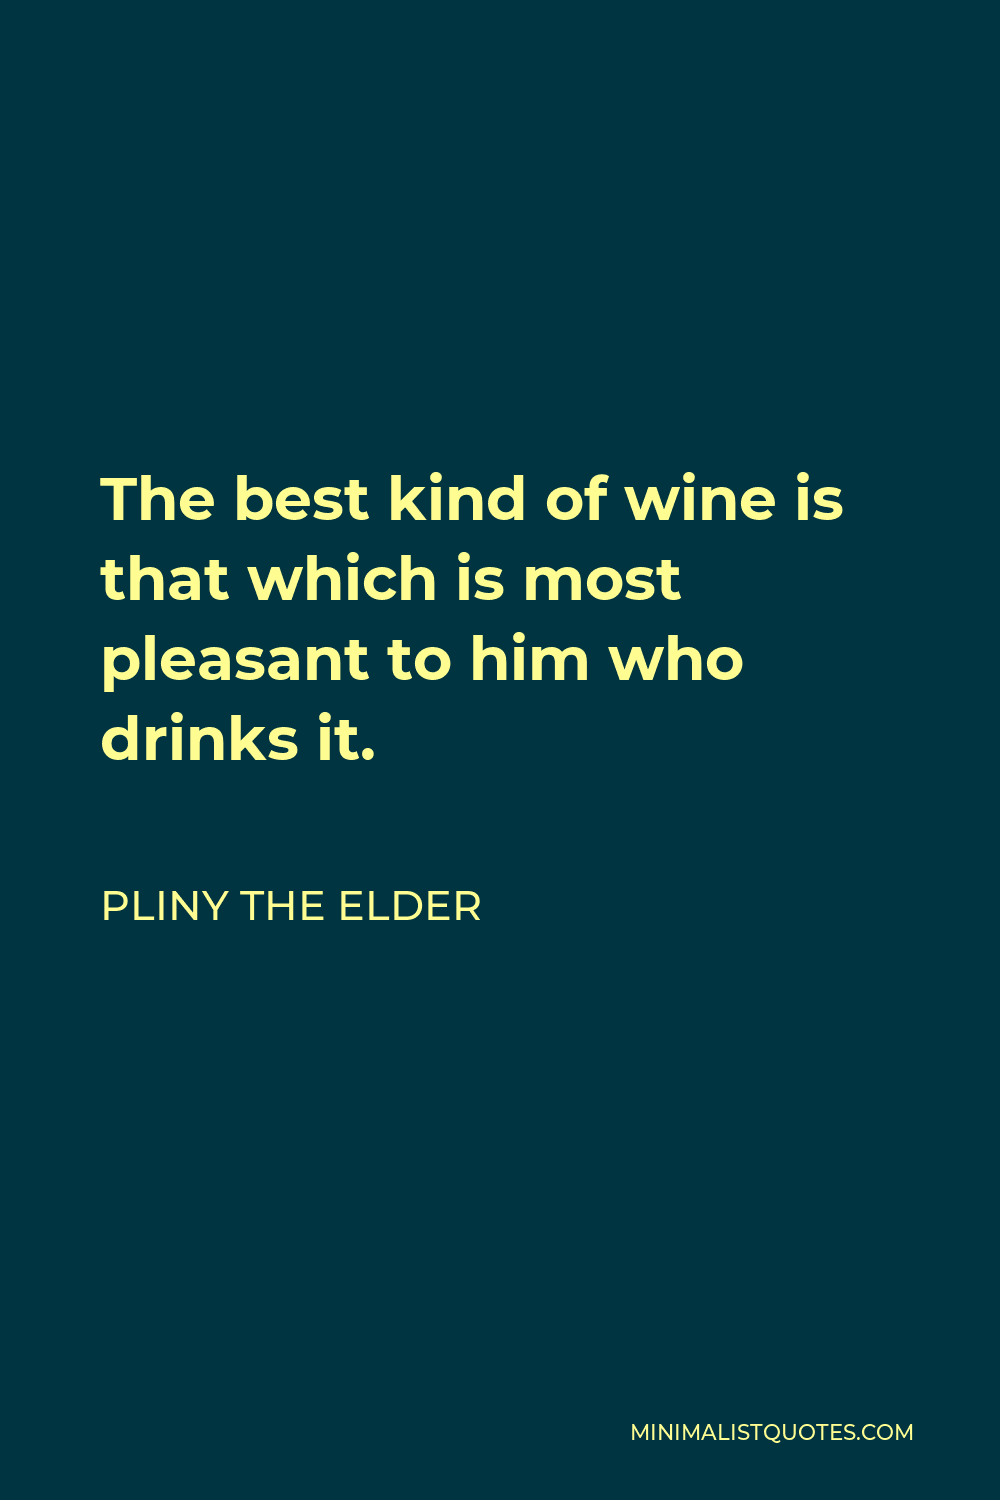 Pliny the Elder Quote - The best kind of wine is that which is most pleasant to him who drinks it.